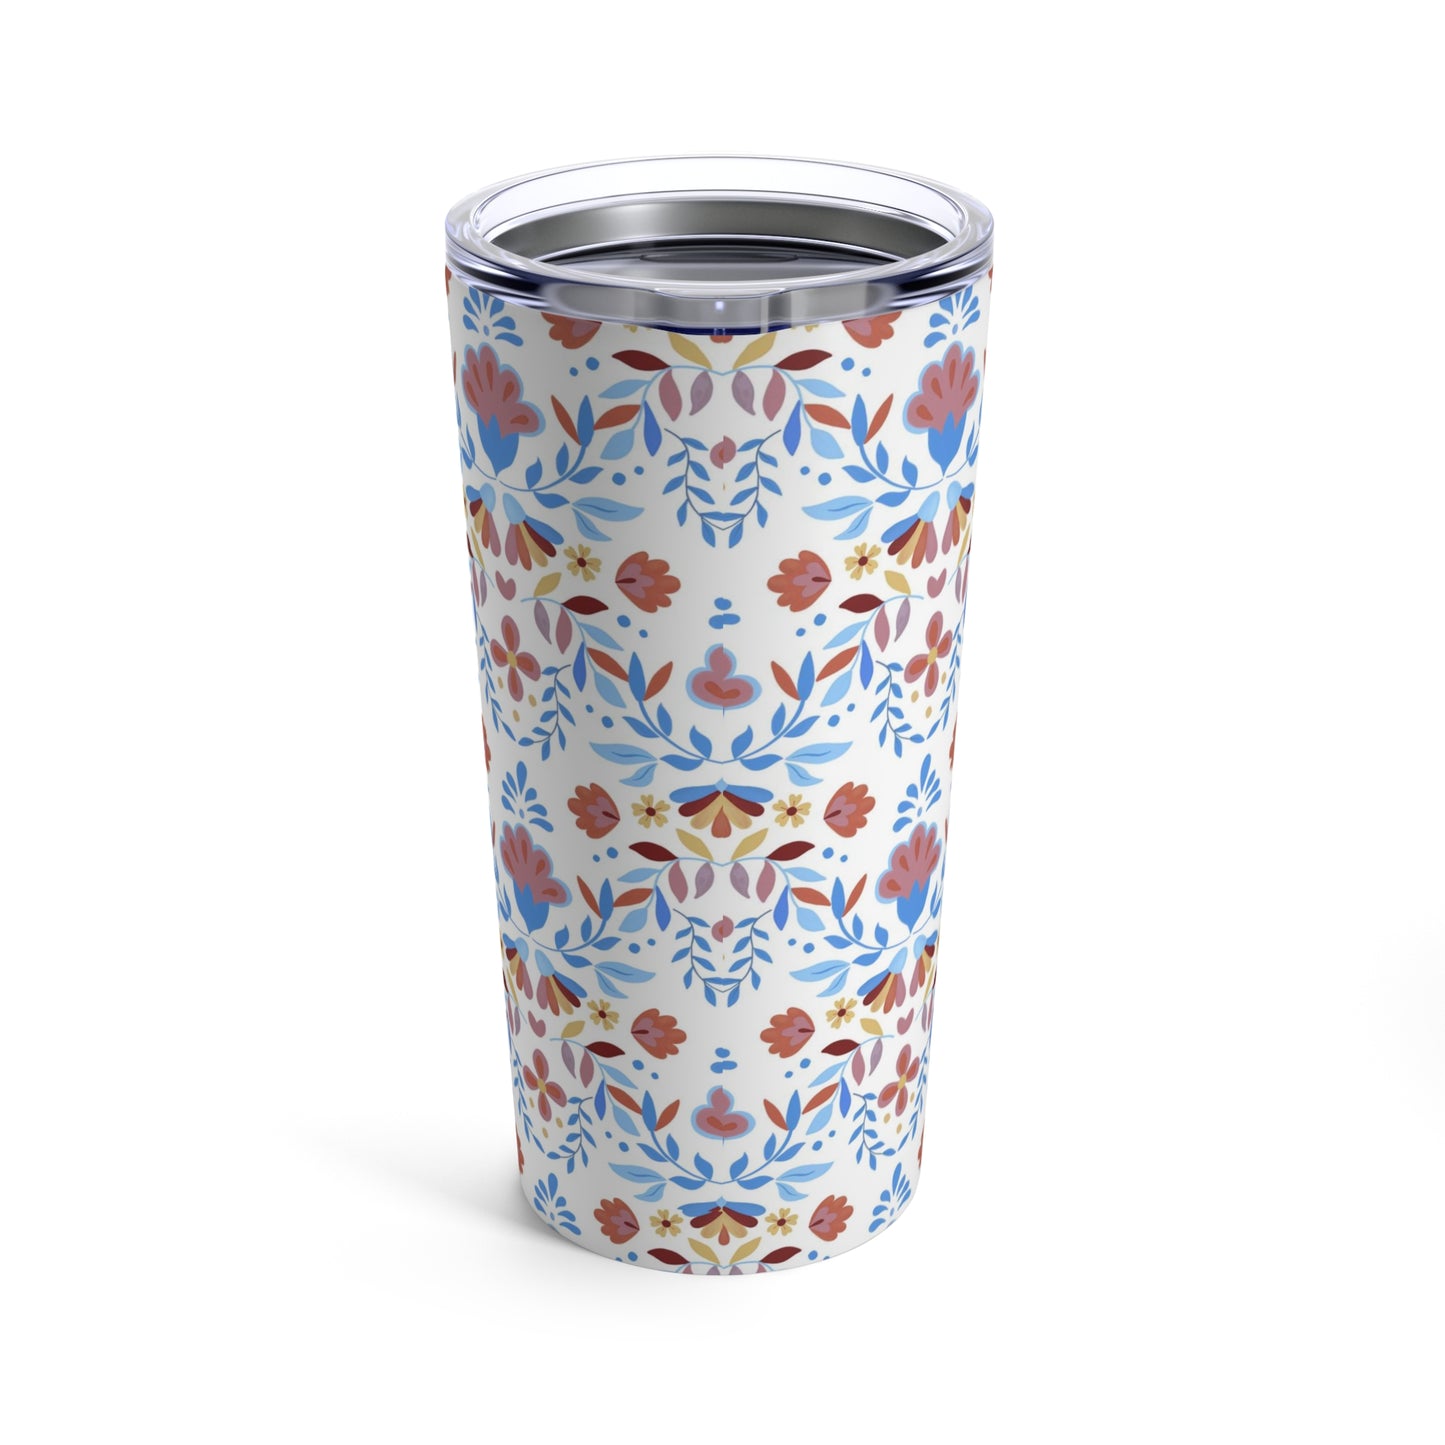 Mexican tumbler 20oz for her. Mexican folk art with Muted colors. Birthday gift for Mexican friend or family. Christmas gift